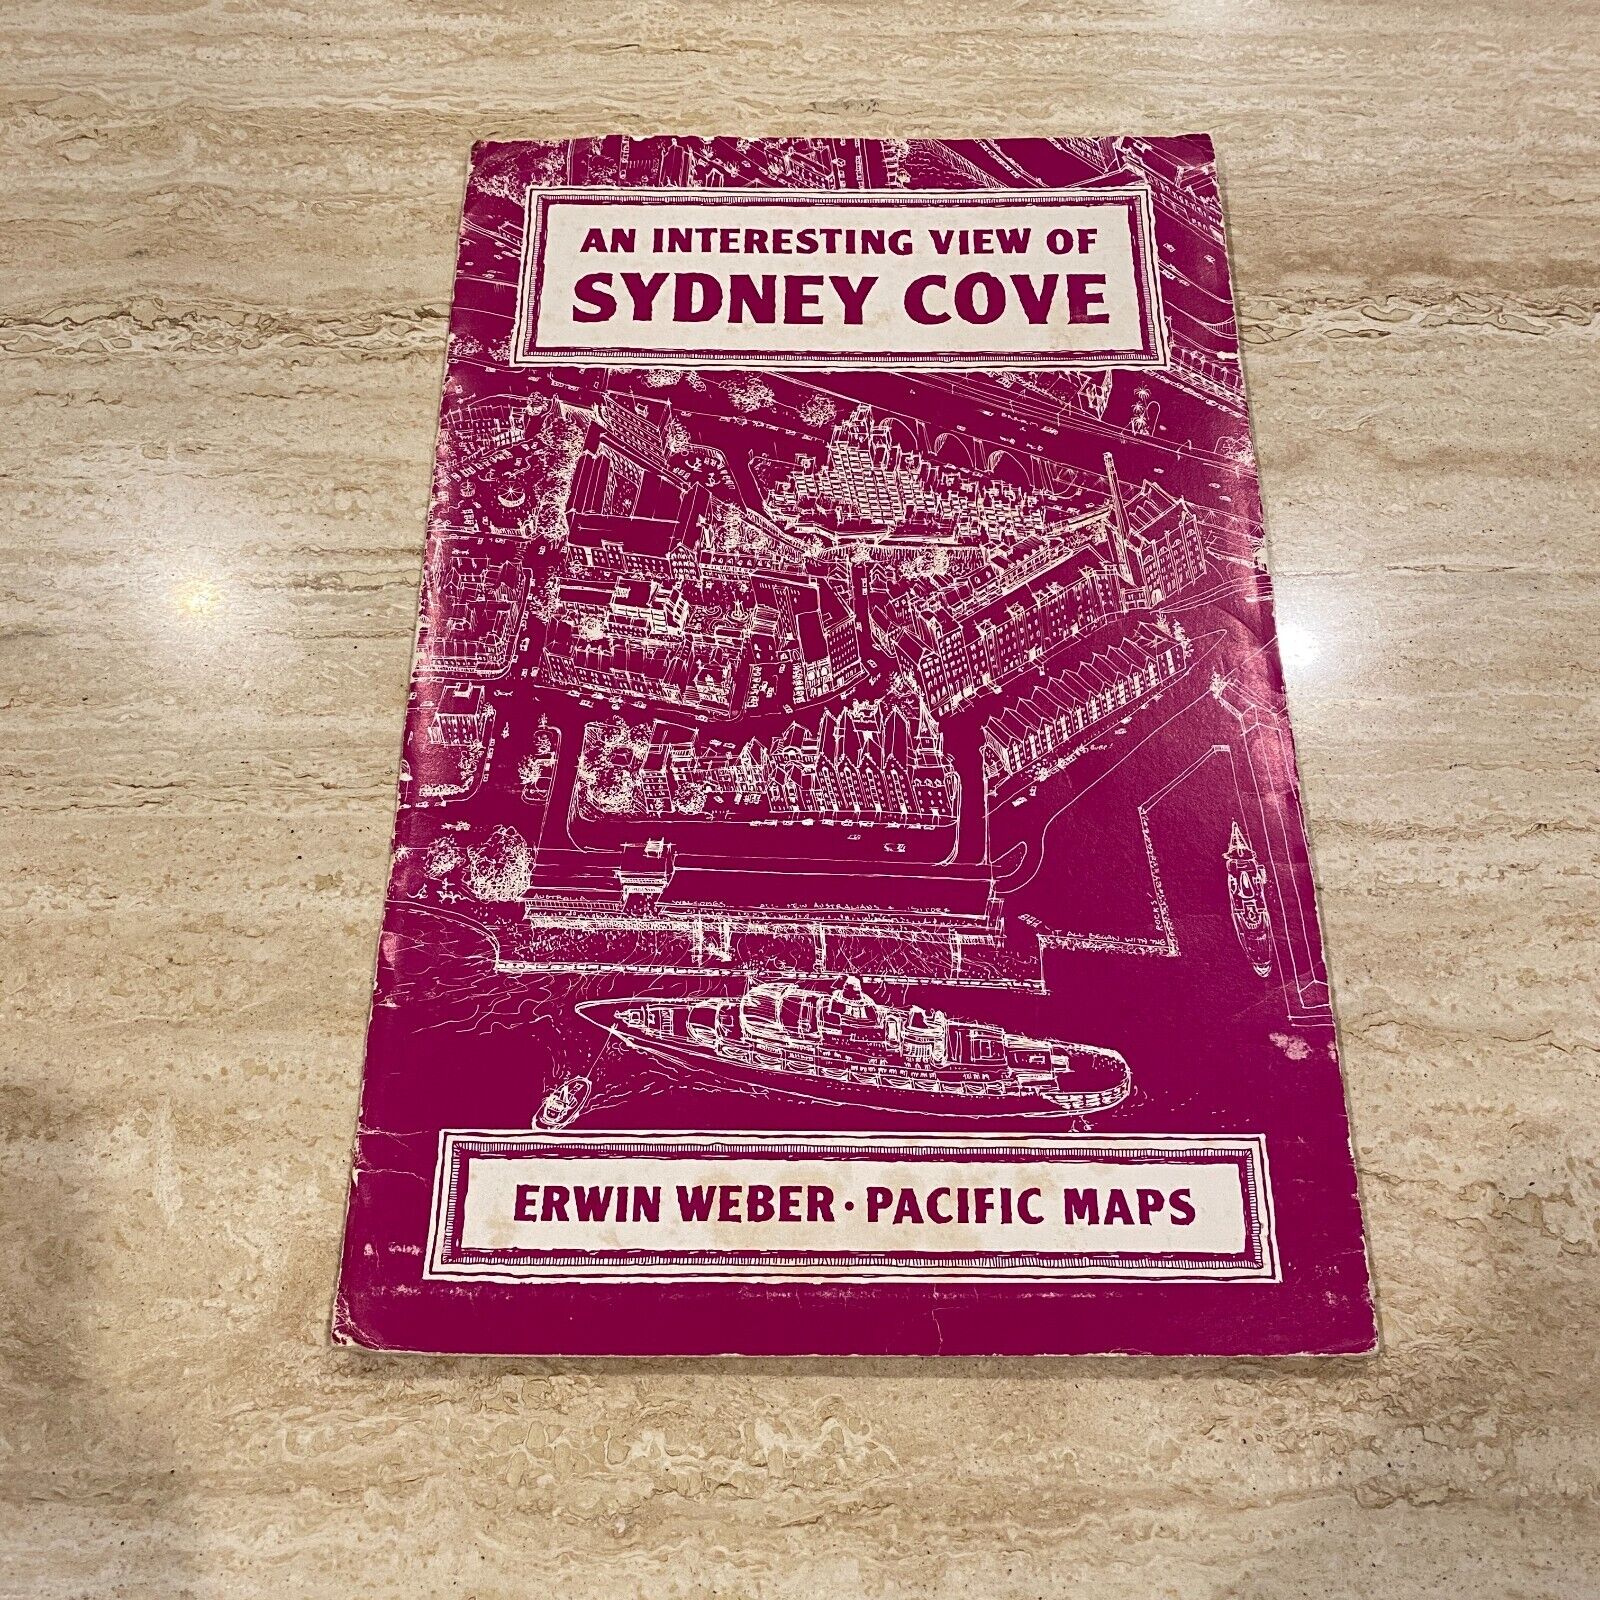 Large Vintage Fold-Out Map: Interesting View Sydney Cove - E. Weber Pacific Maps